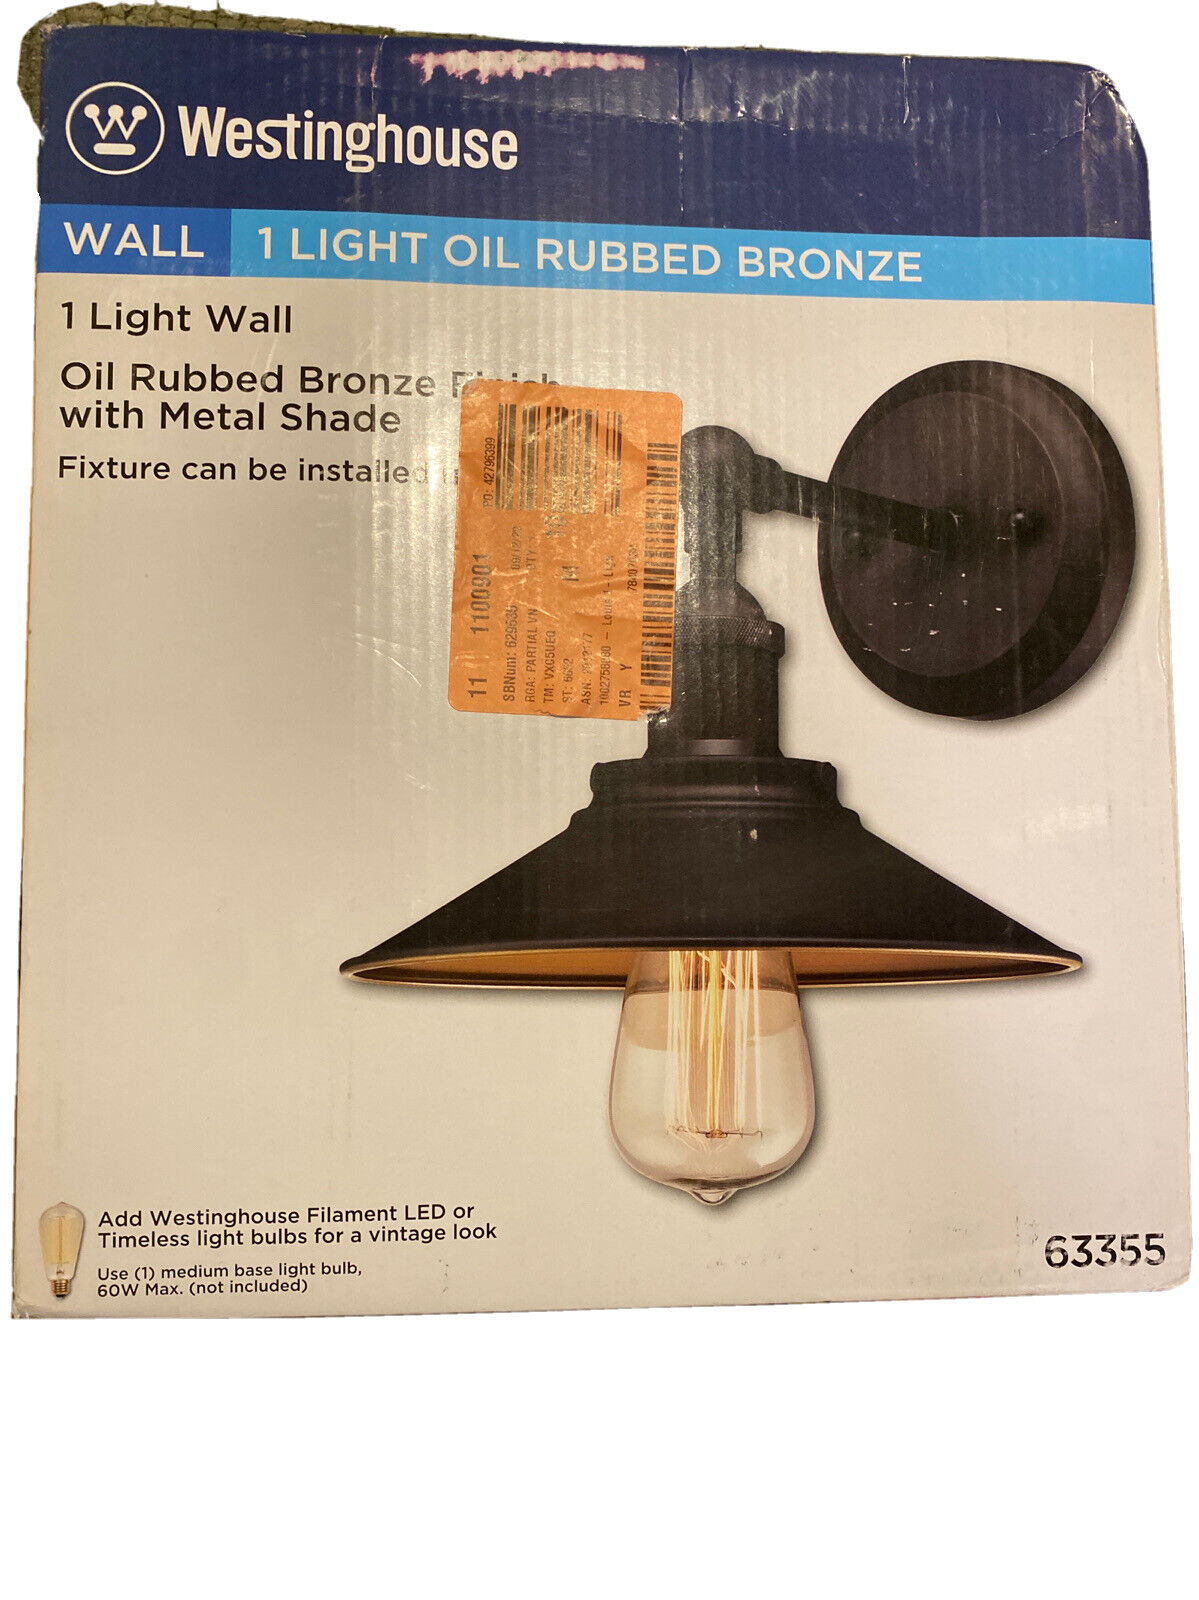 Westinghouse 6335500 LOUIS 1 Light 8-9/16" Tall Wall Sconce - Bronze - $44.84